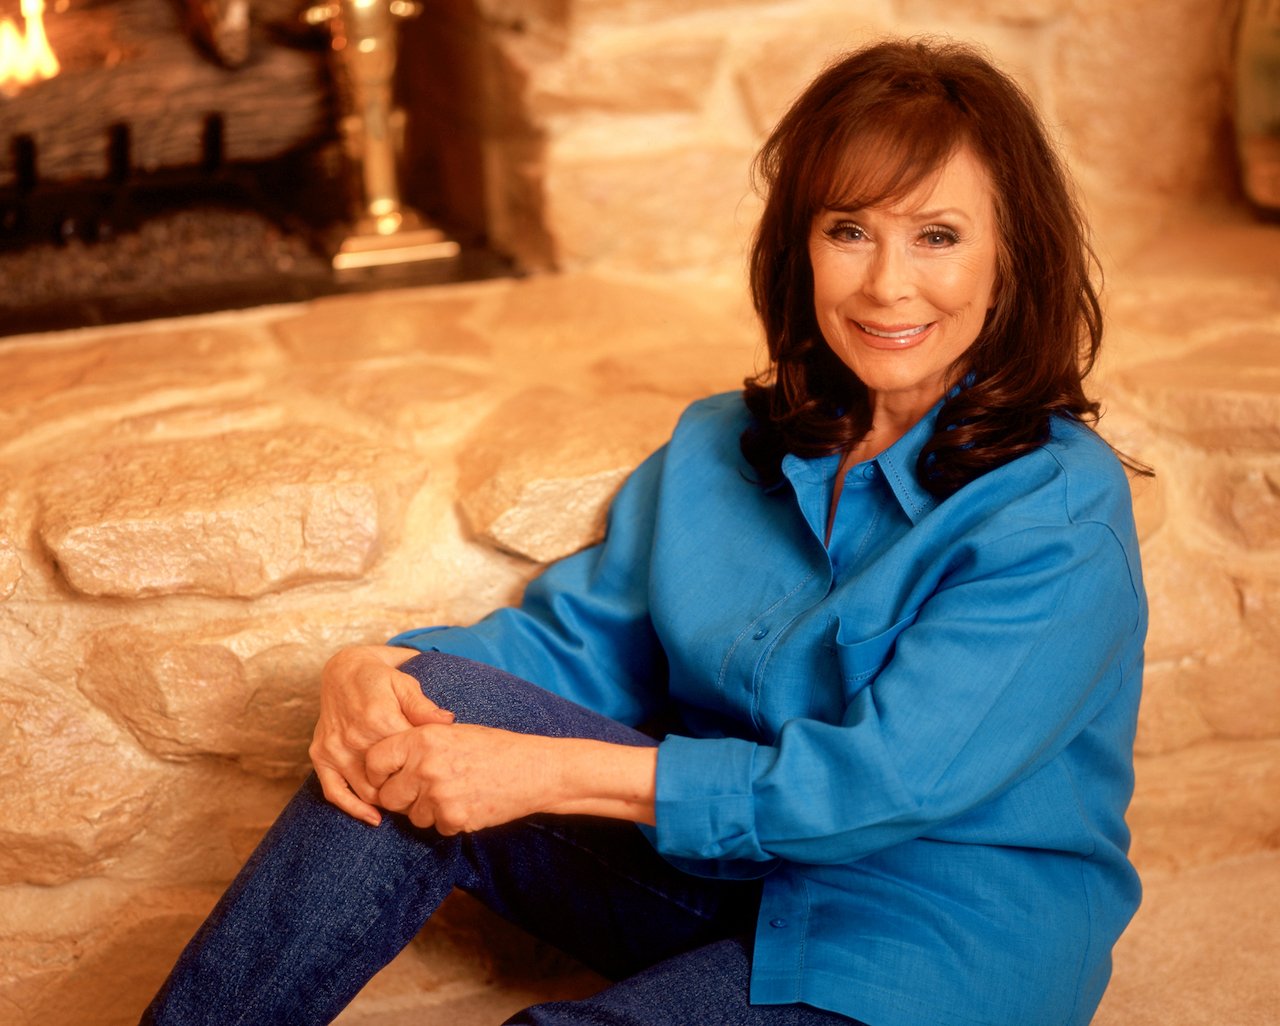 Loretta Lynn poses for a portrait in front of her fireplace circa 1997 in Hurricane Mills, Tennessee, a town she purchased.